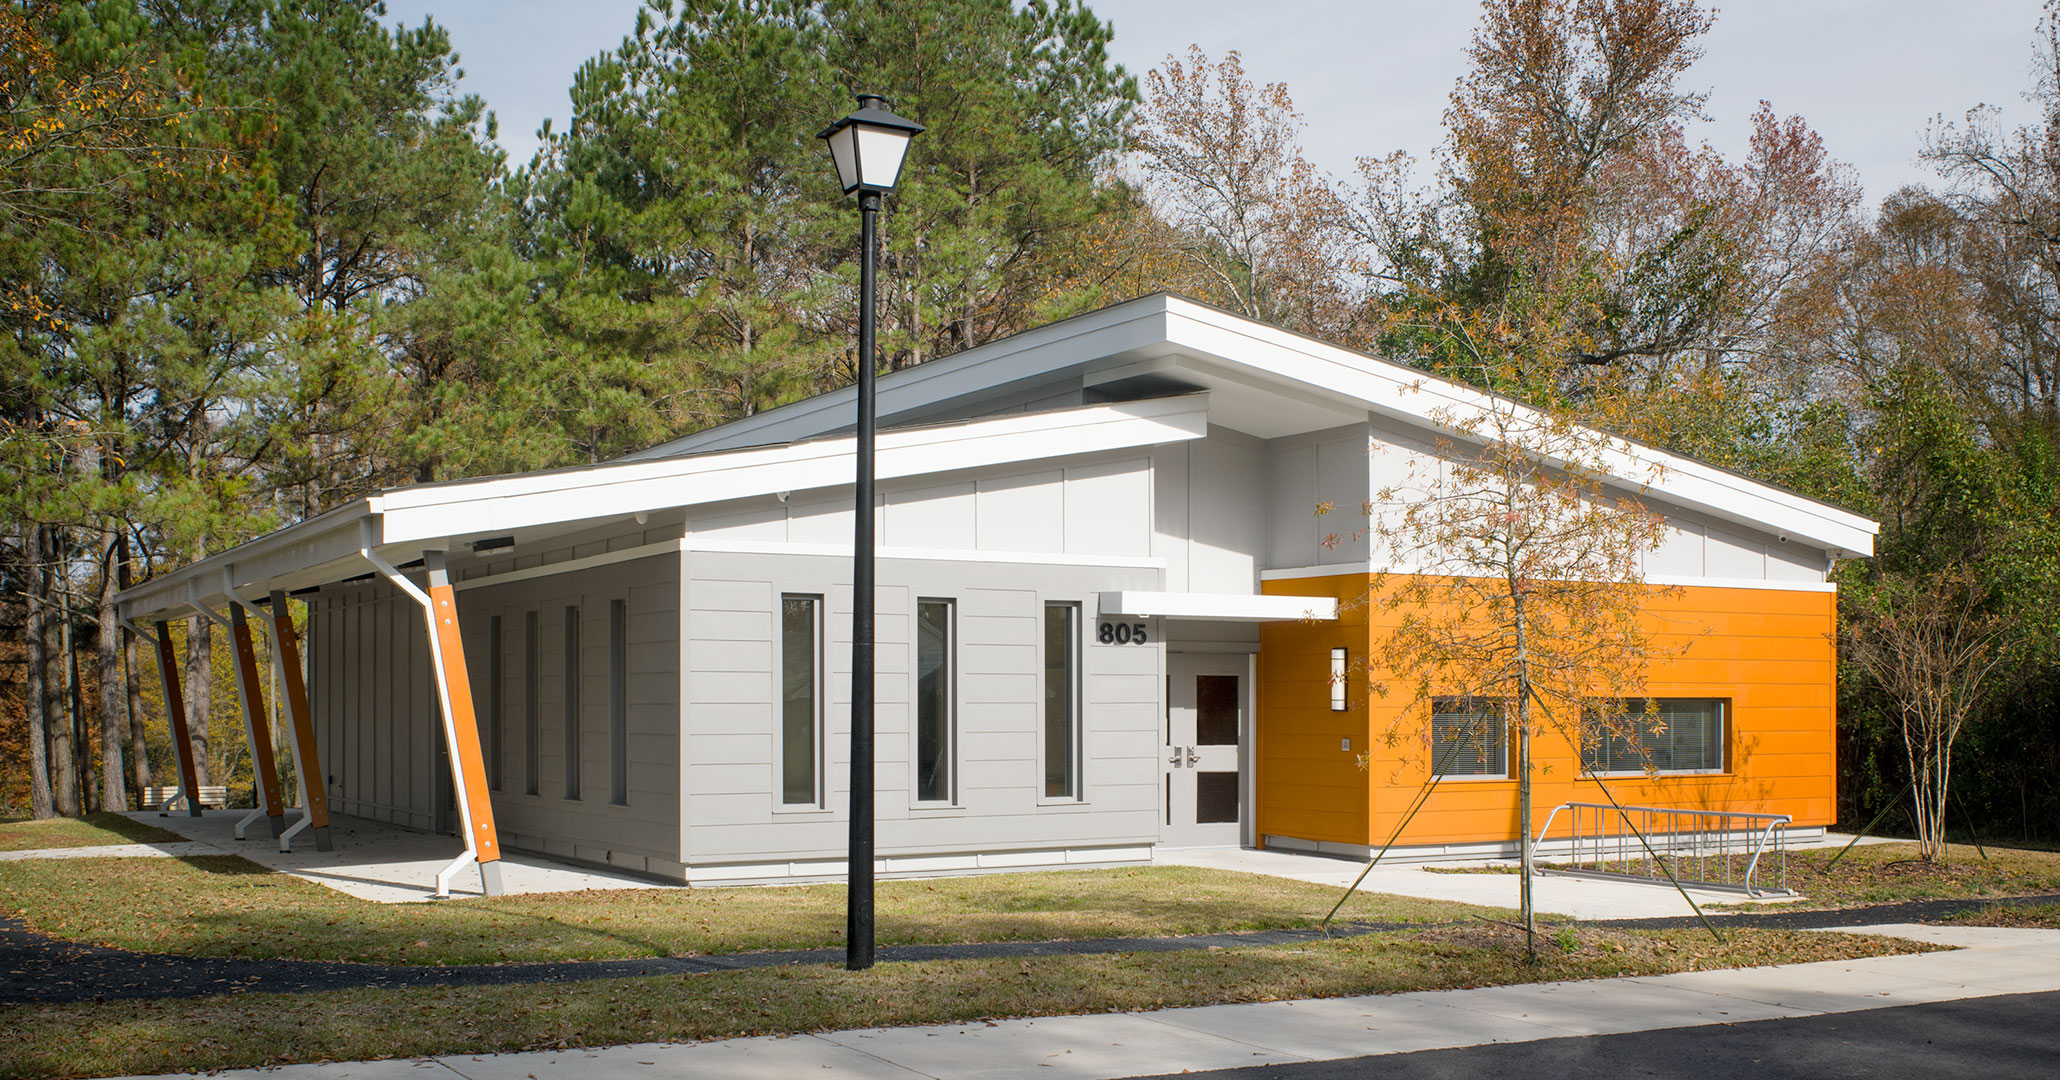 Boudreaux worked with Richland County Recreation to design the Ridgewood Community Center.